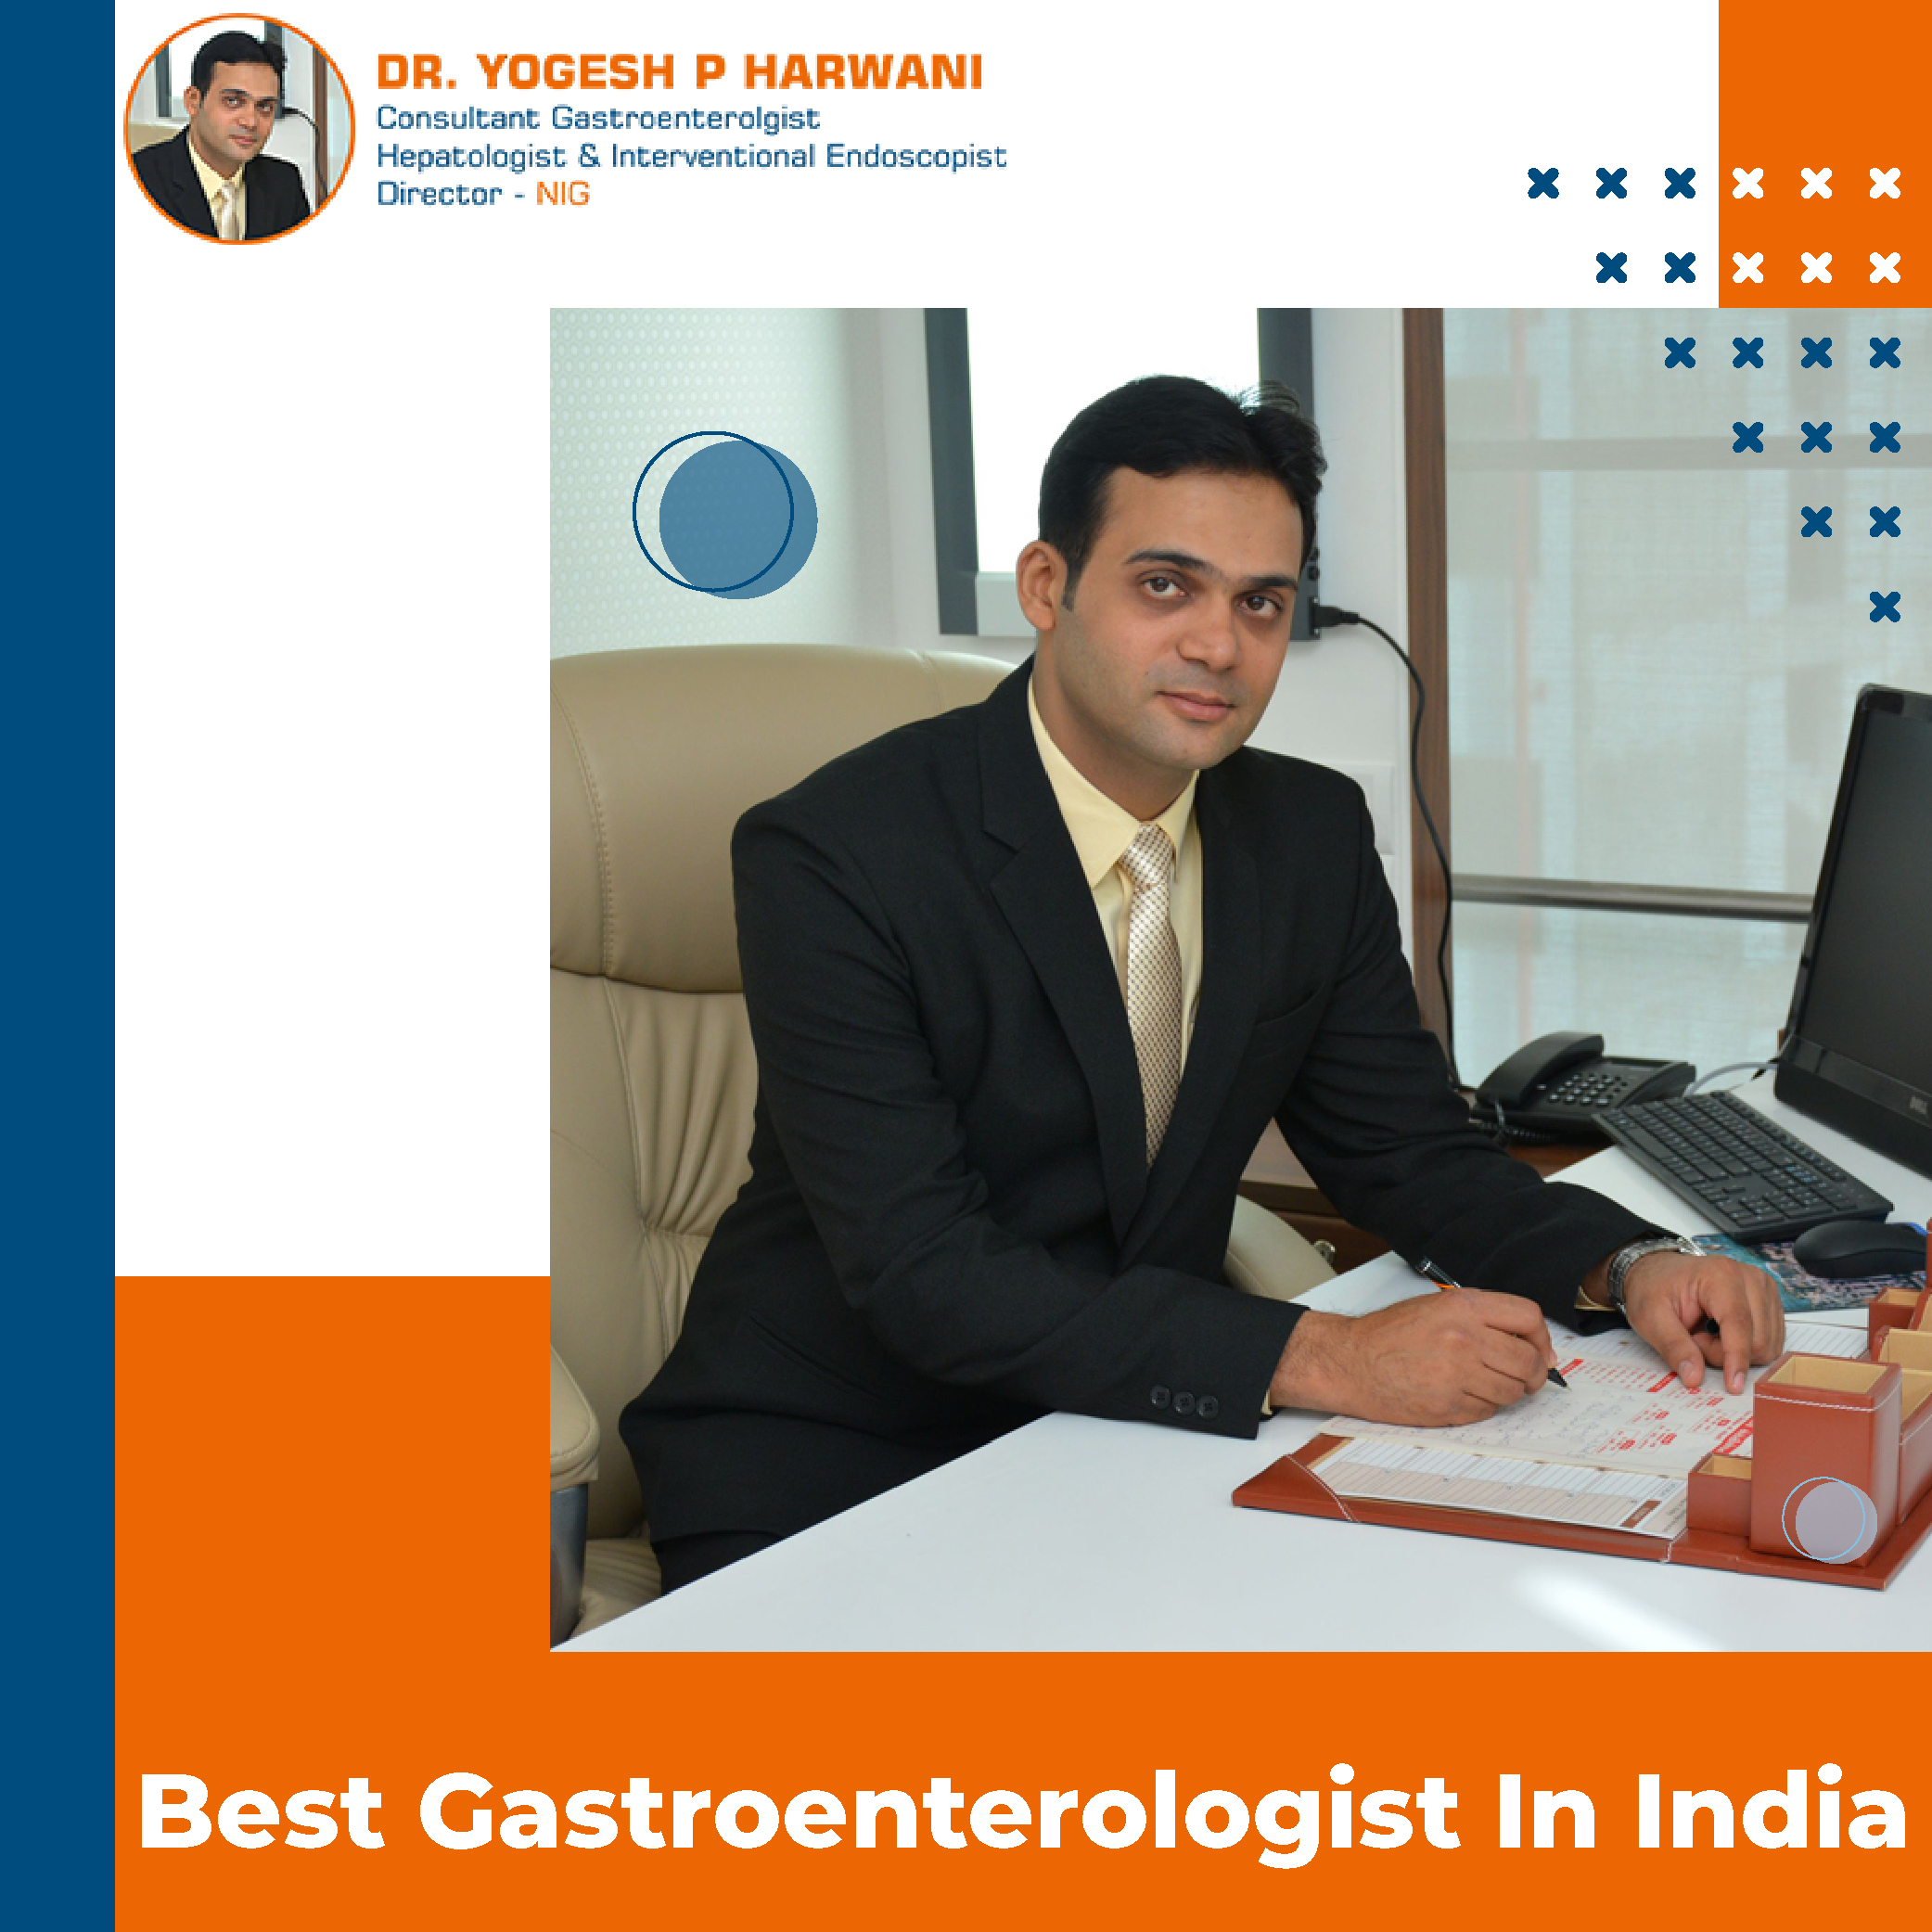 best doctor for gastroenterology in india, best gastroenterology hospital in india, best gastroenterologist doctor in india, top gastroenterologist doctor in india, best gastroenterologist doctor in india, top gastroenterologist doctor in india, gastroplasty sleeve hospital in india, best Gastroenterologists in India, gastroenterology doctor India, specialists Best Gastroenterologist in India, top verified Gastro Doctors in India, Gastrointestinal Surgeons in India, Top hospitals in India for Gastroenterology specialty, best gastroenterologist in india quora, best gastroenterologist in hyderabad india, best gastroenterologist in world, top gastroenterologist in Hyderabad, top 10 gastroenterologist in delhi, top 10 gastroenterologist in Kolkata, best gastroenterology hospital in asia, best gastroenterologist in Chennai